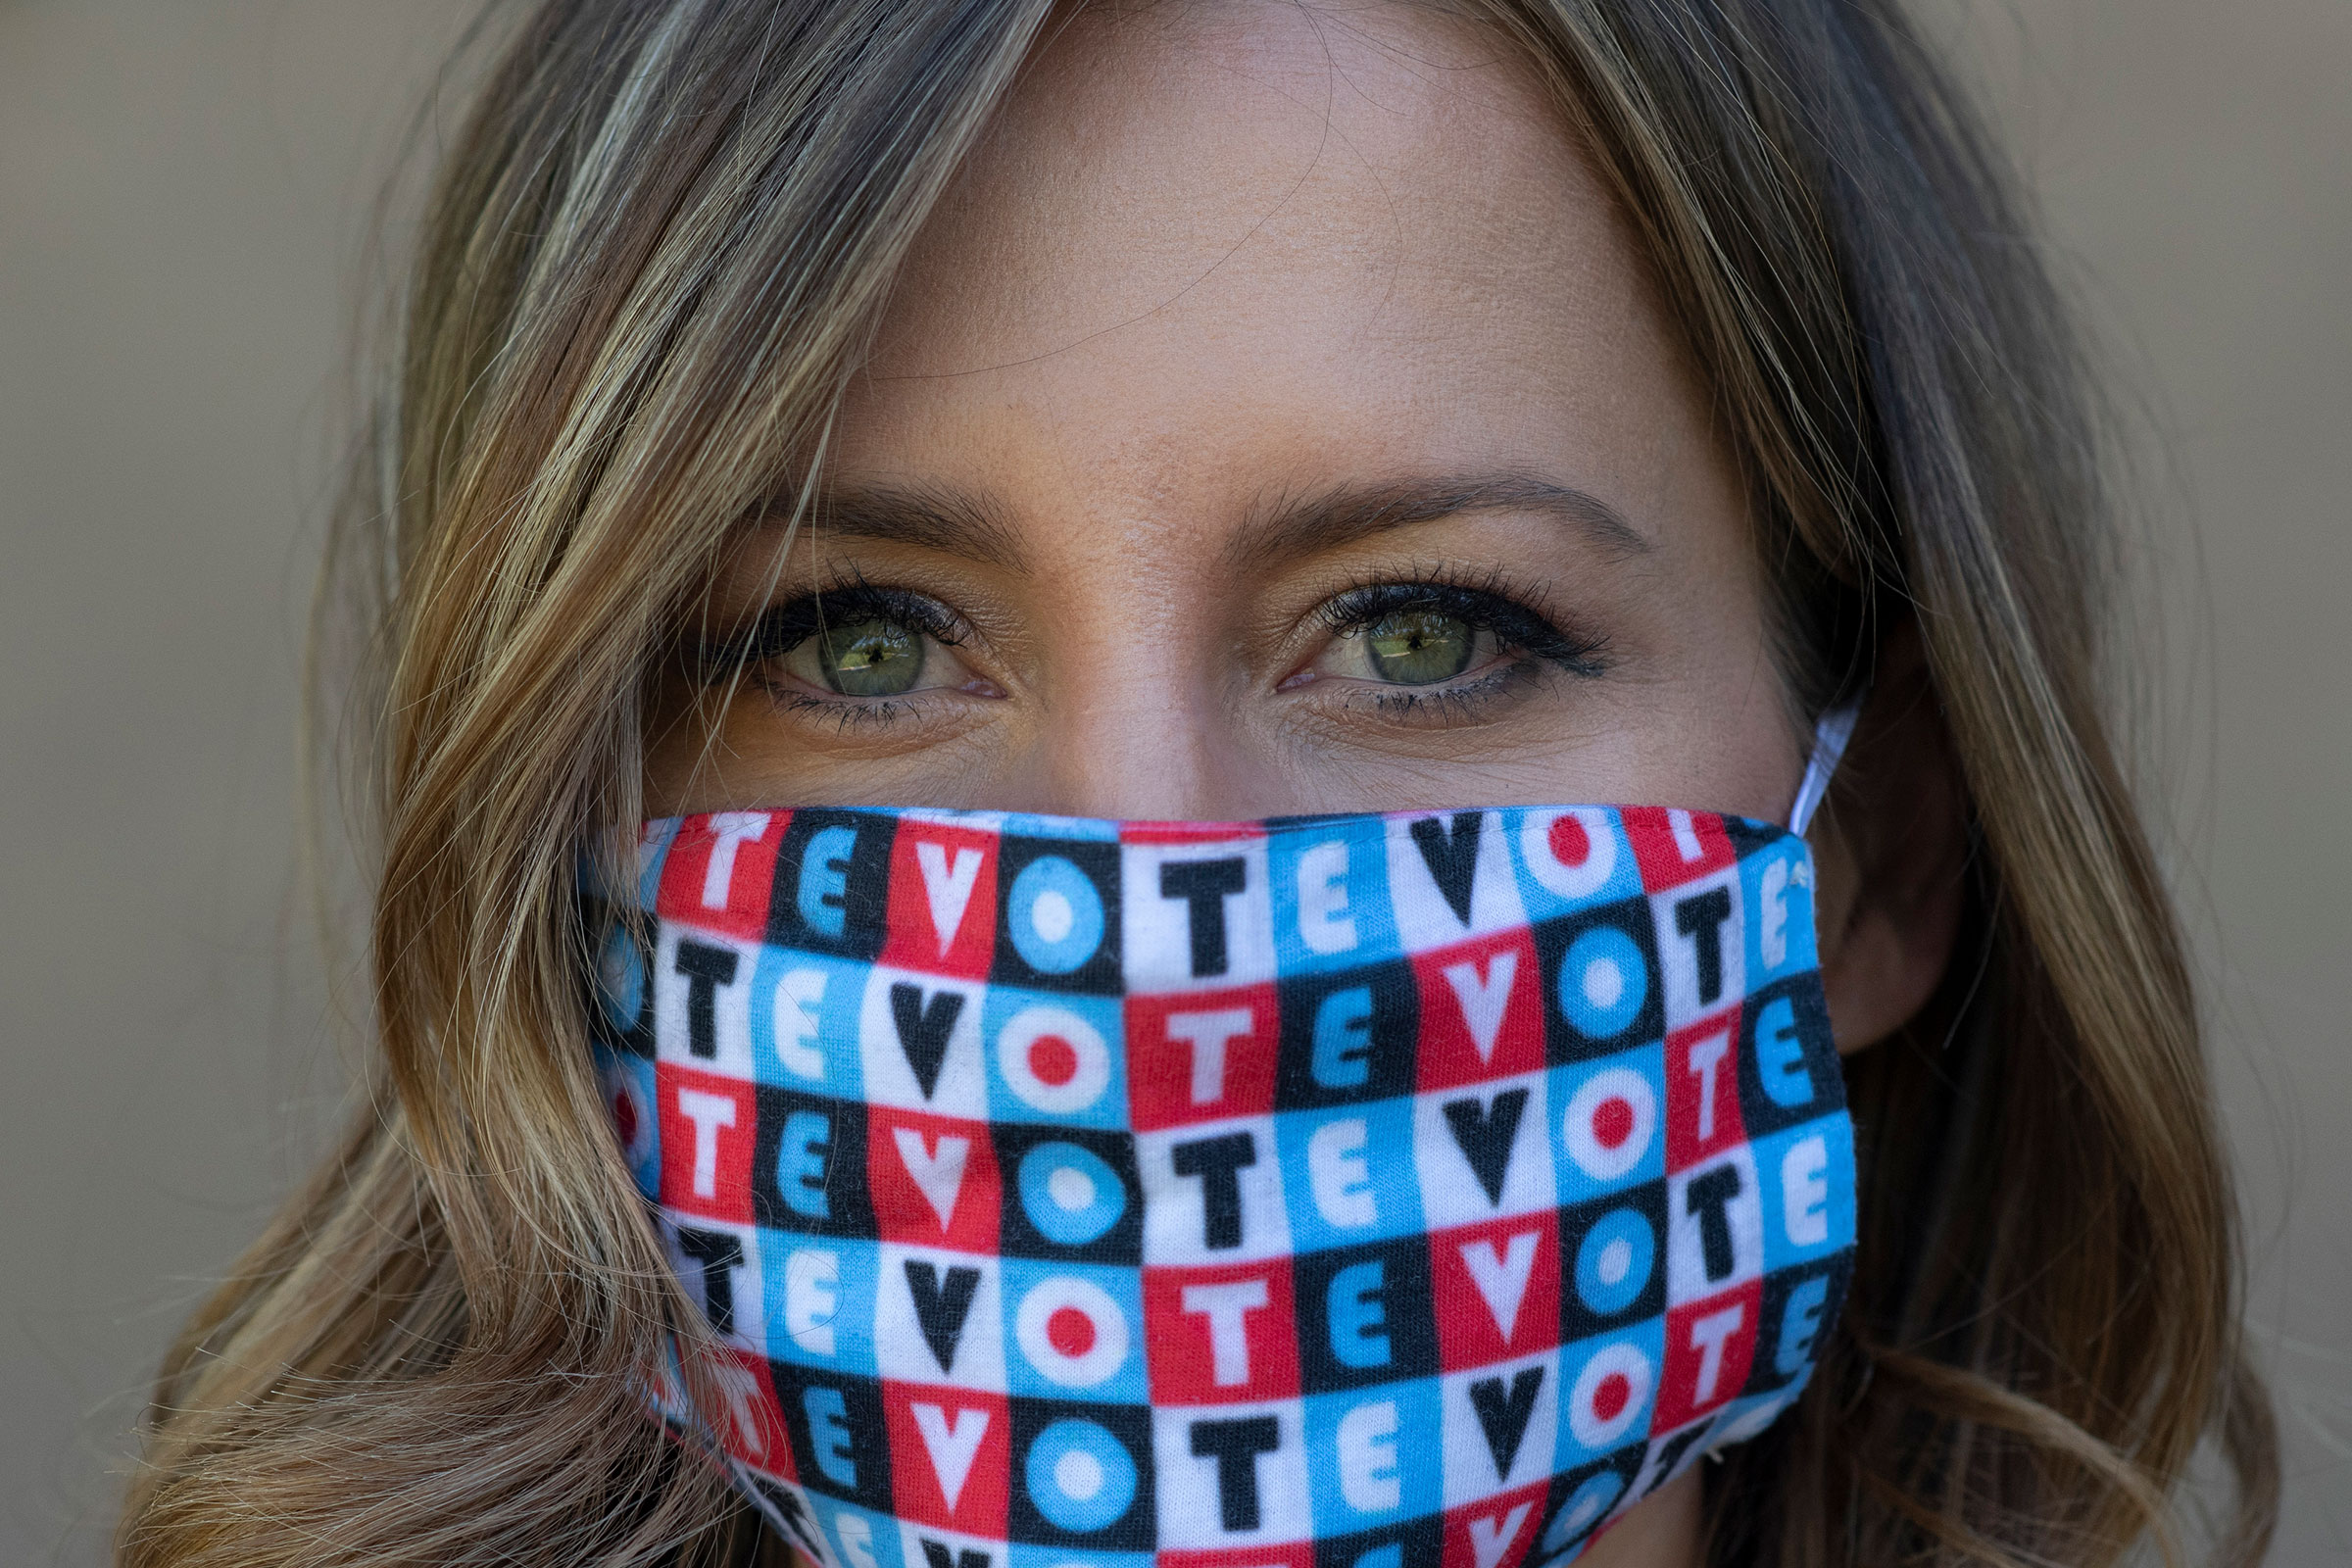 Amber McReynolds wearing a mask that says "vote" on Sept. 29, 2020.